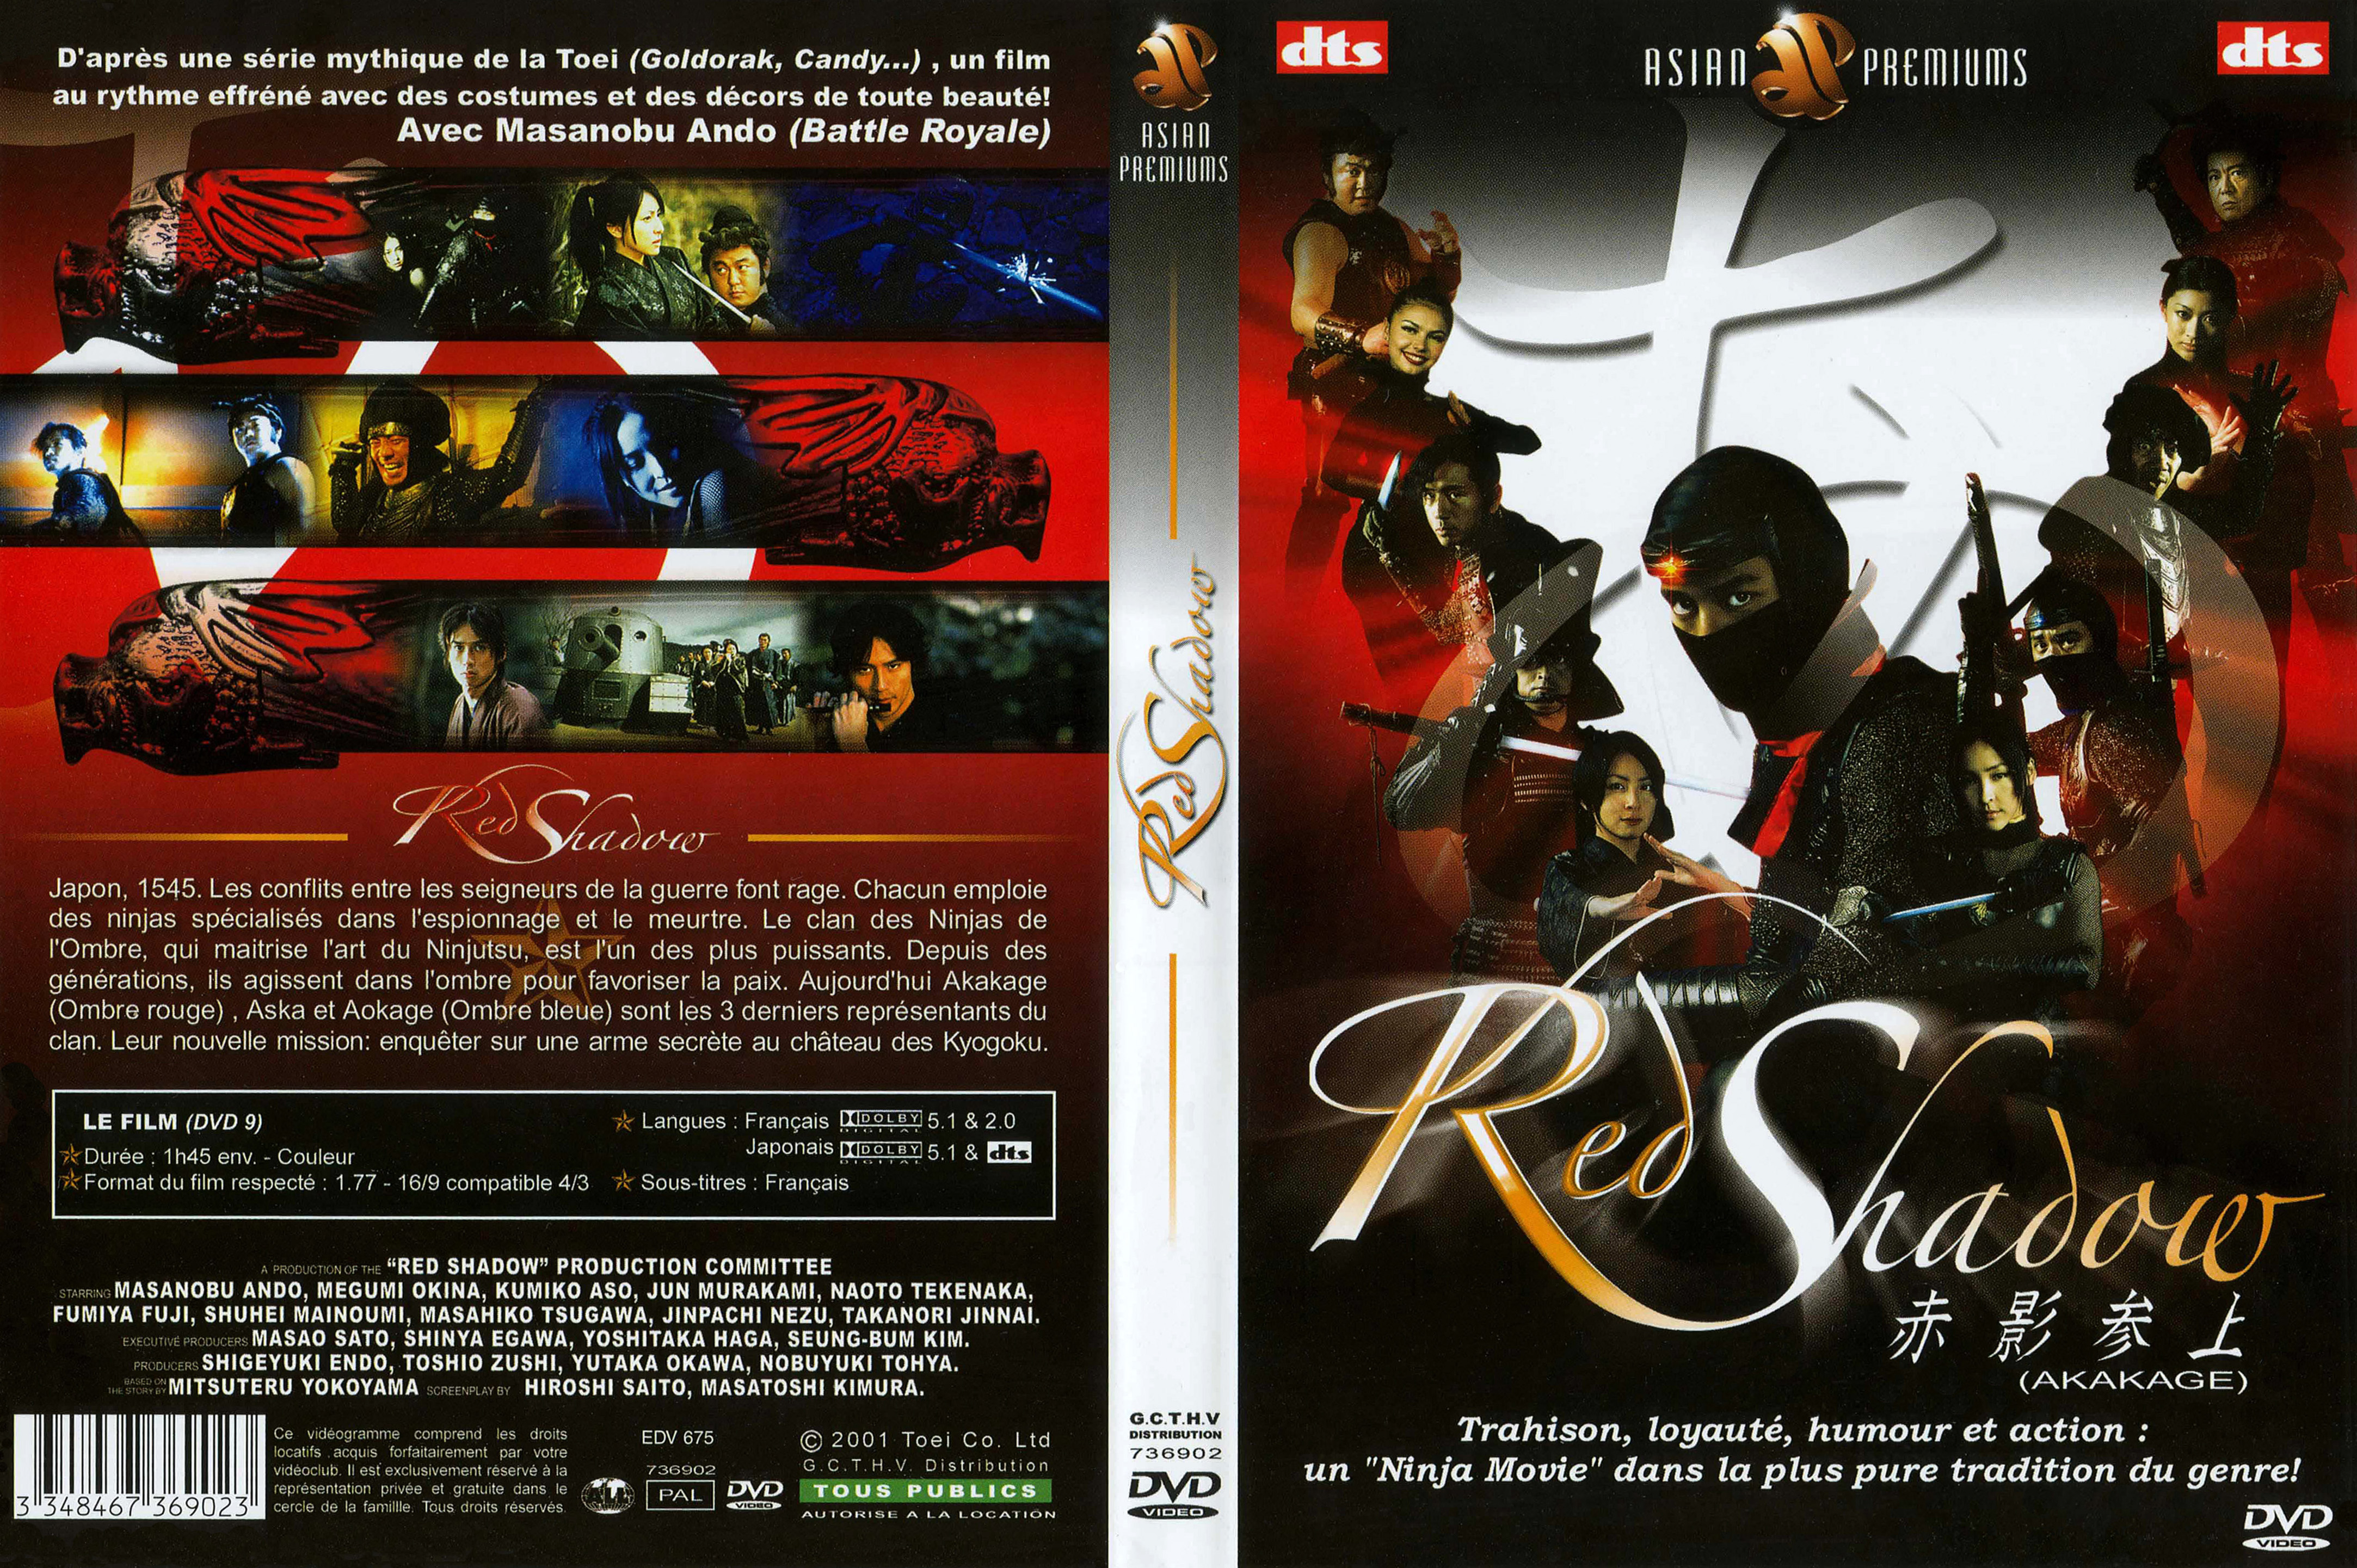 Jaquette DVD Red shadow